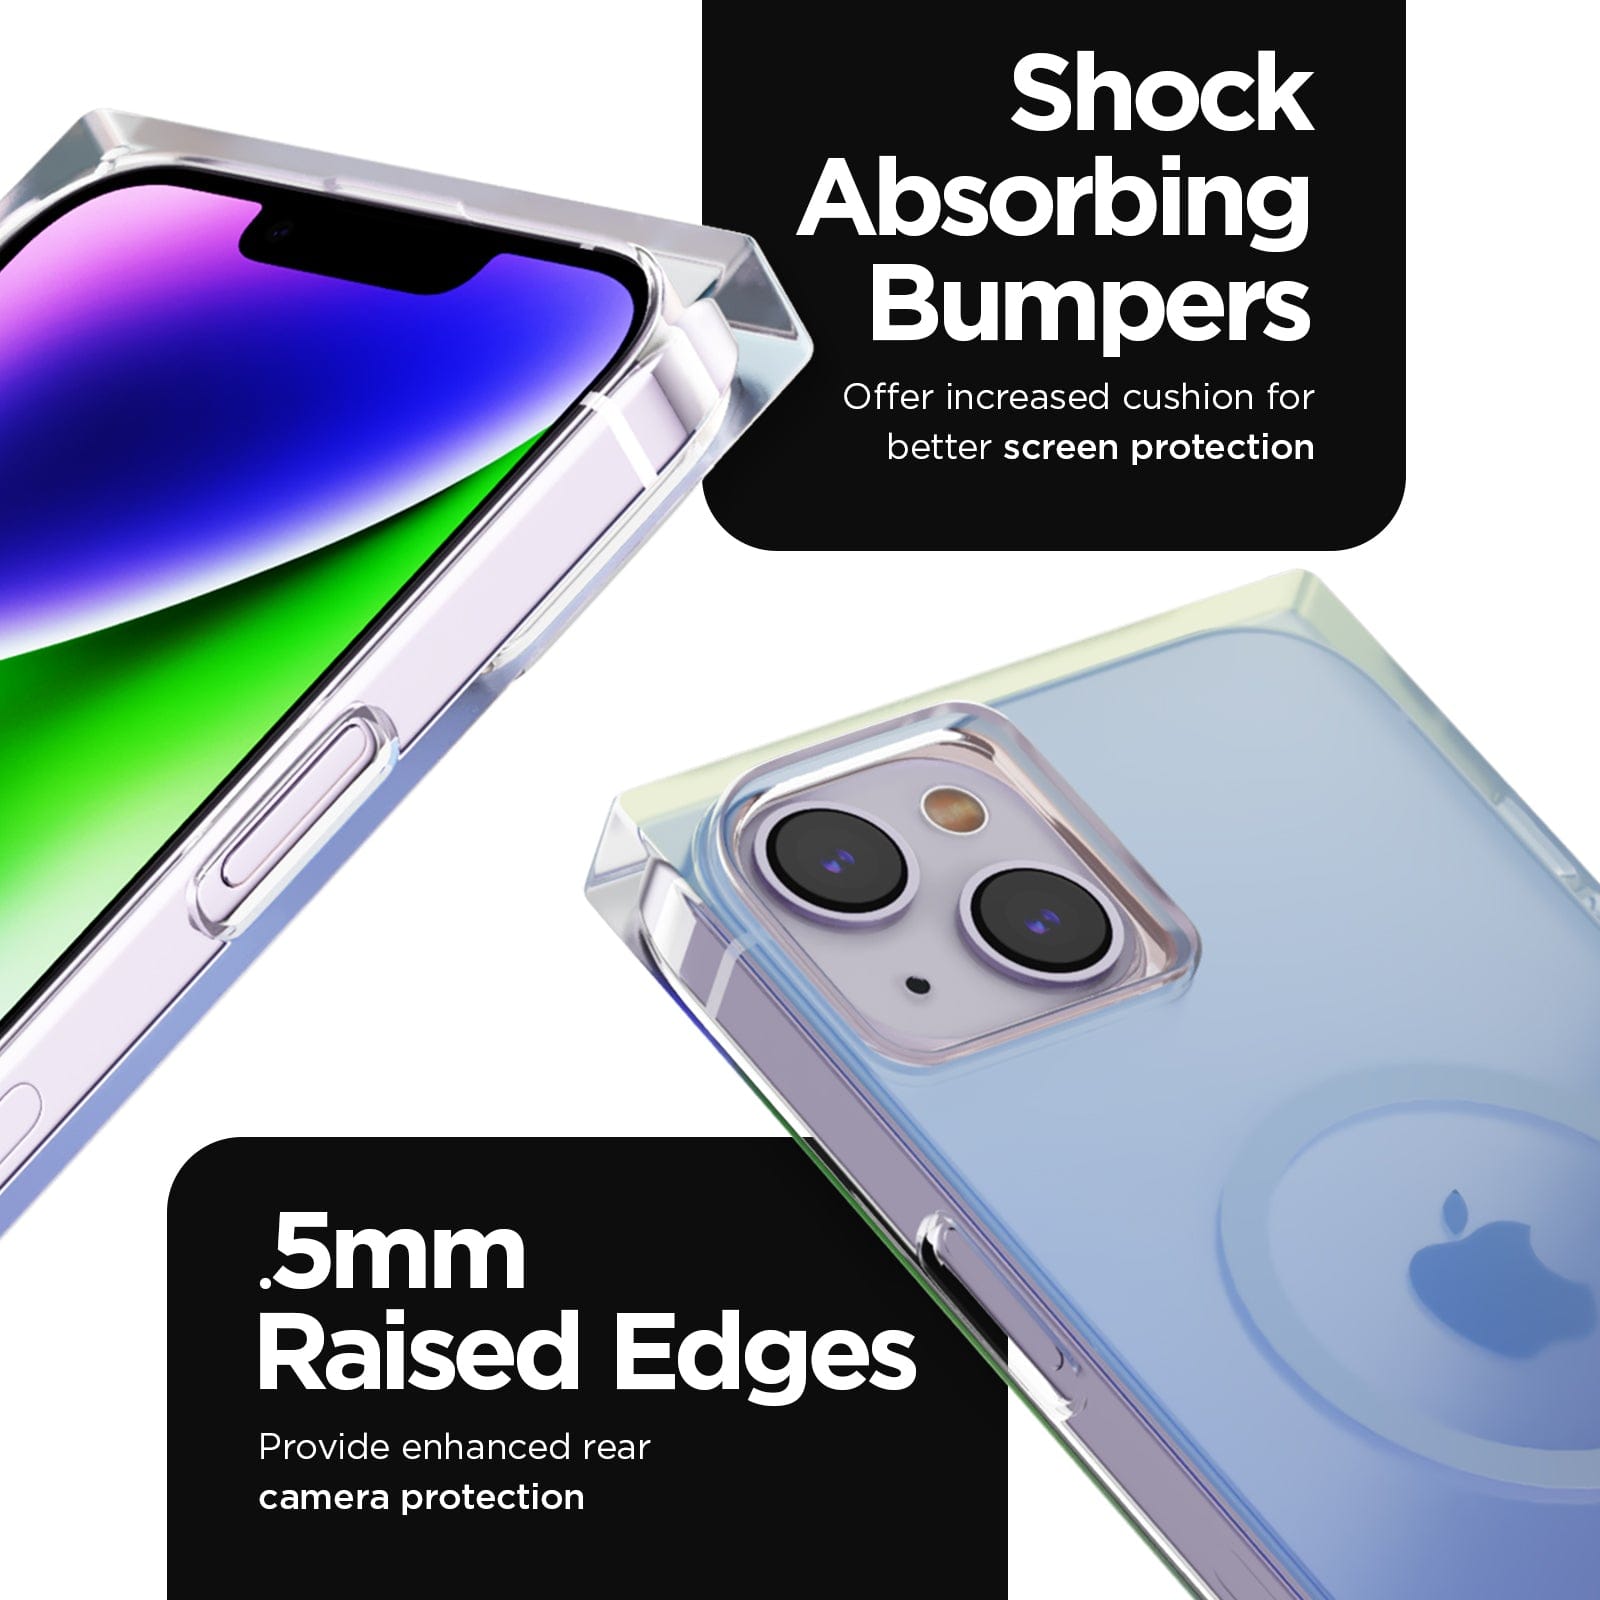 SHOCK ABSORBING BUMPERS OFFER INCREASED CUSHION FOR BETTER SCREEN PROTECTION. .5MM RAISED EDGES PROVIDE ENHANCED REAR CAMERA PROTECTION. 